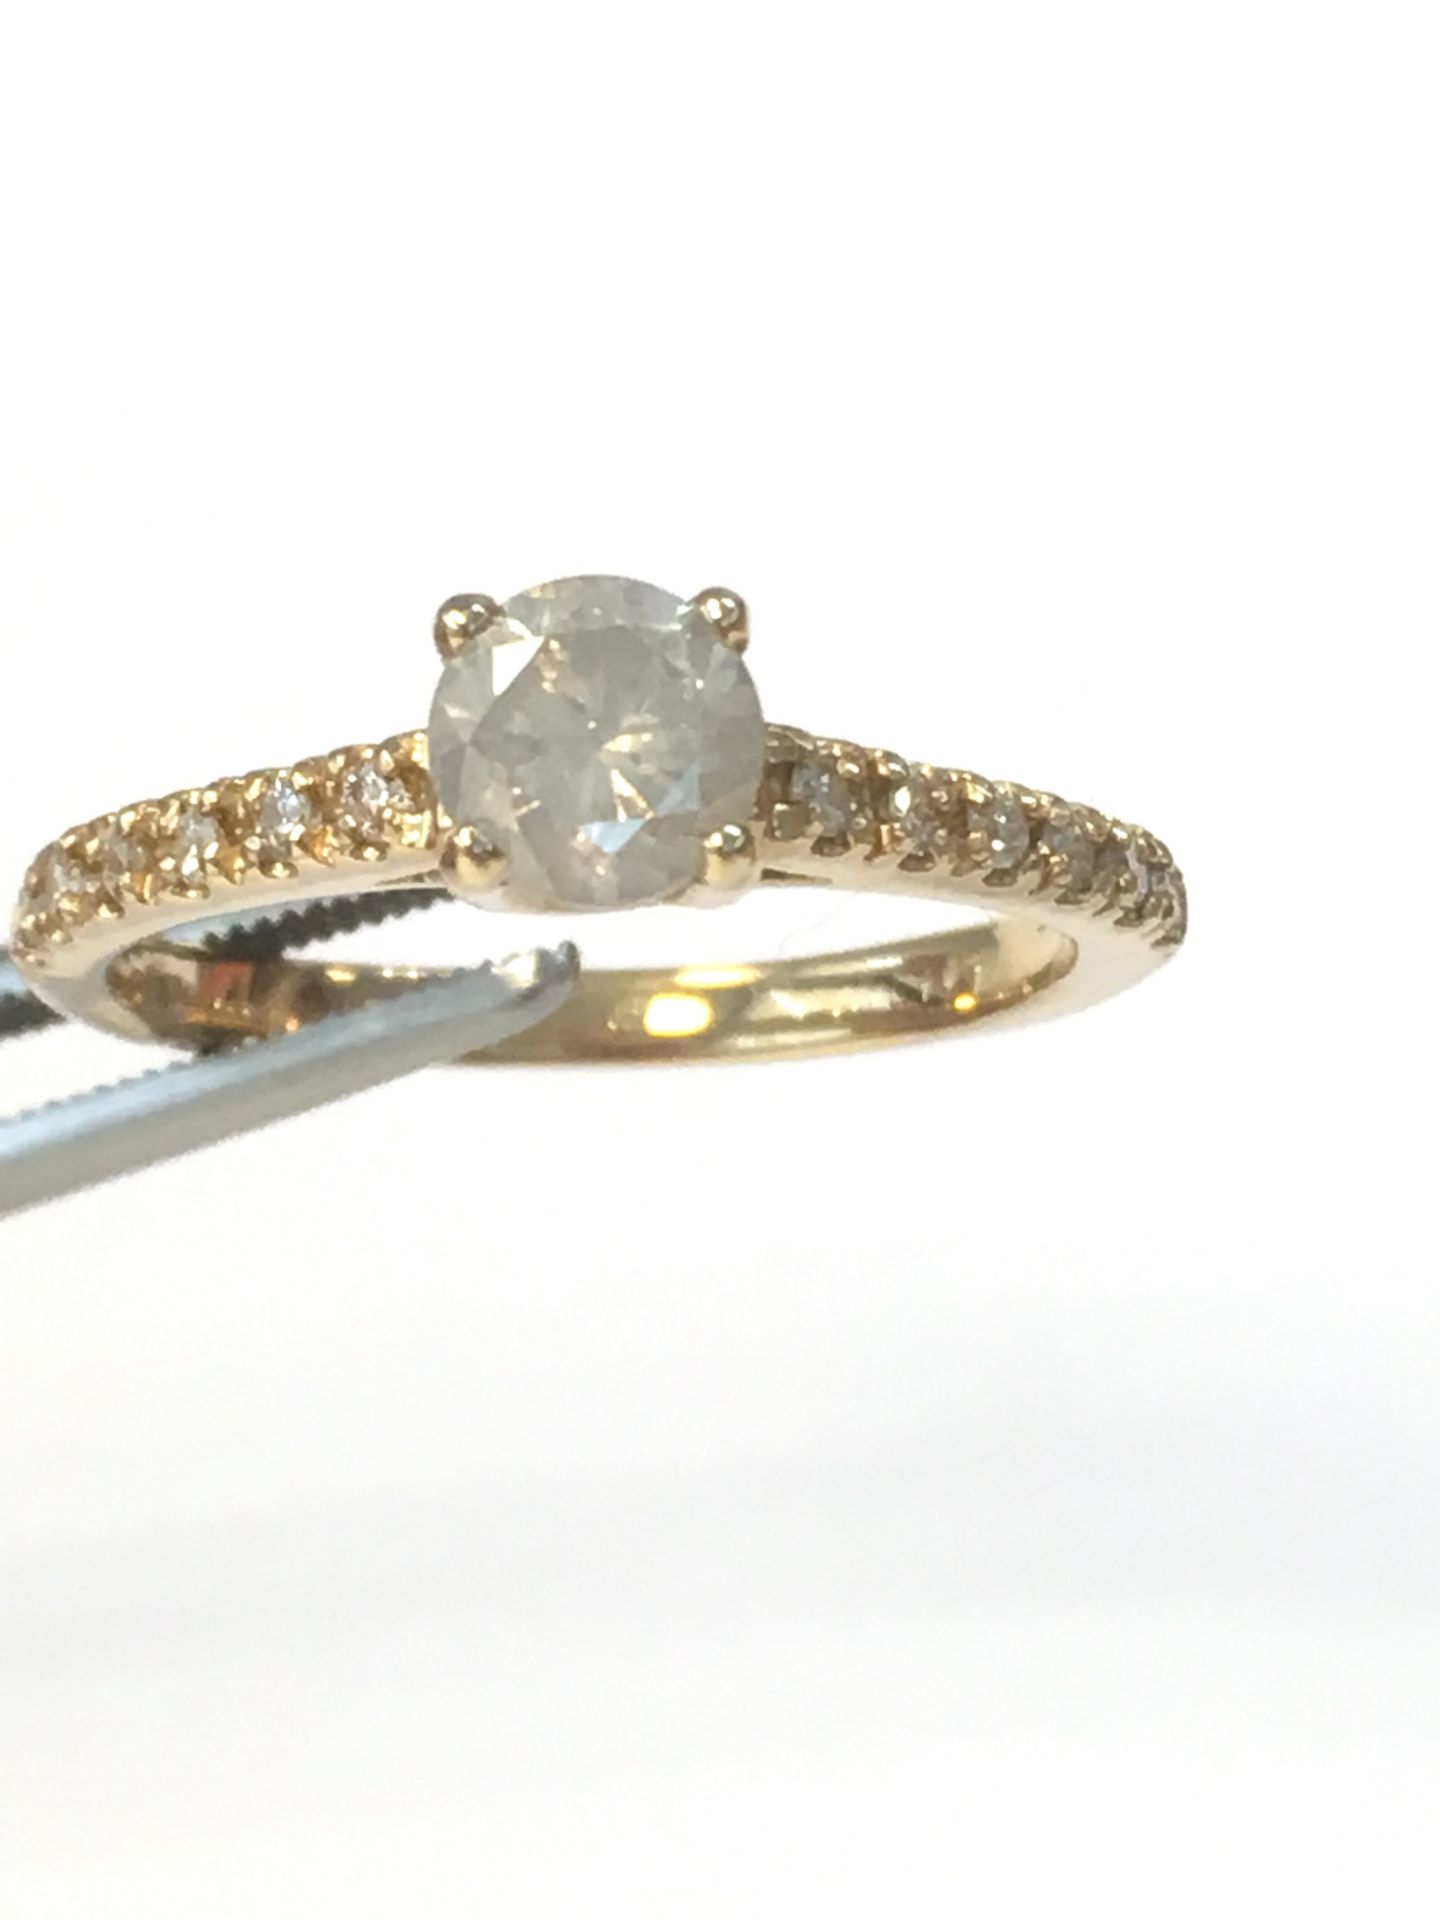 14K Yellow Gold Engagement Ring Hallmarked - Image 3 of 3